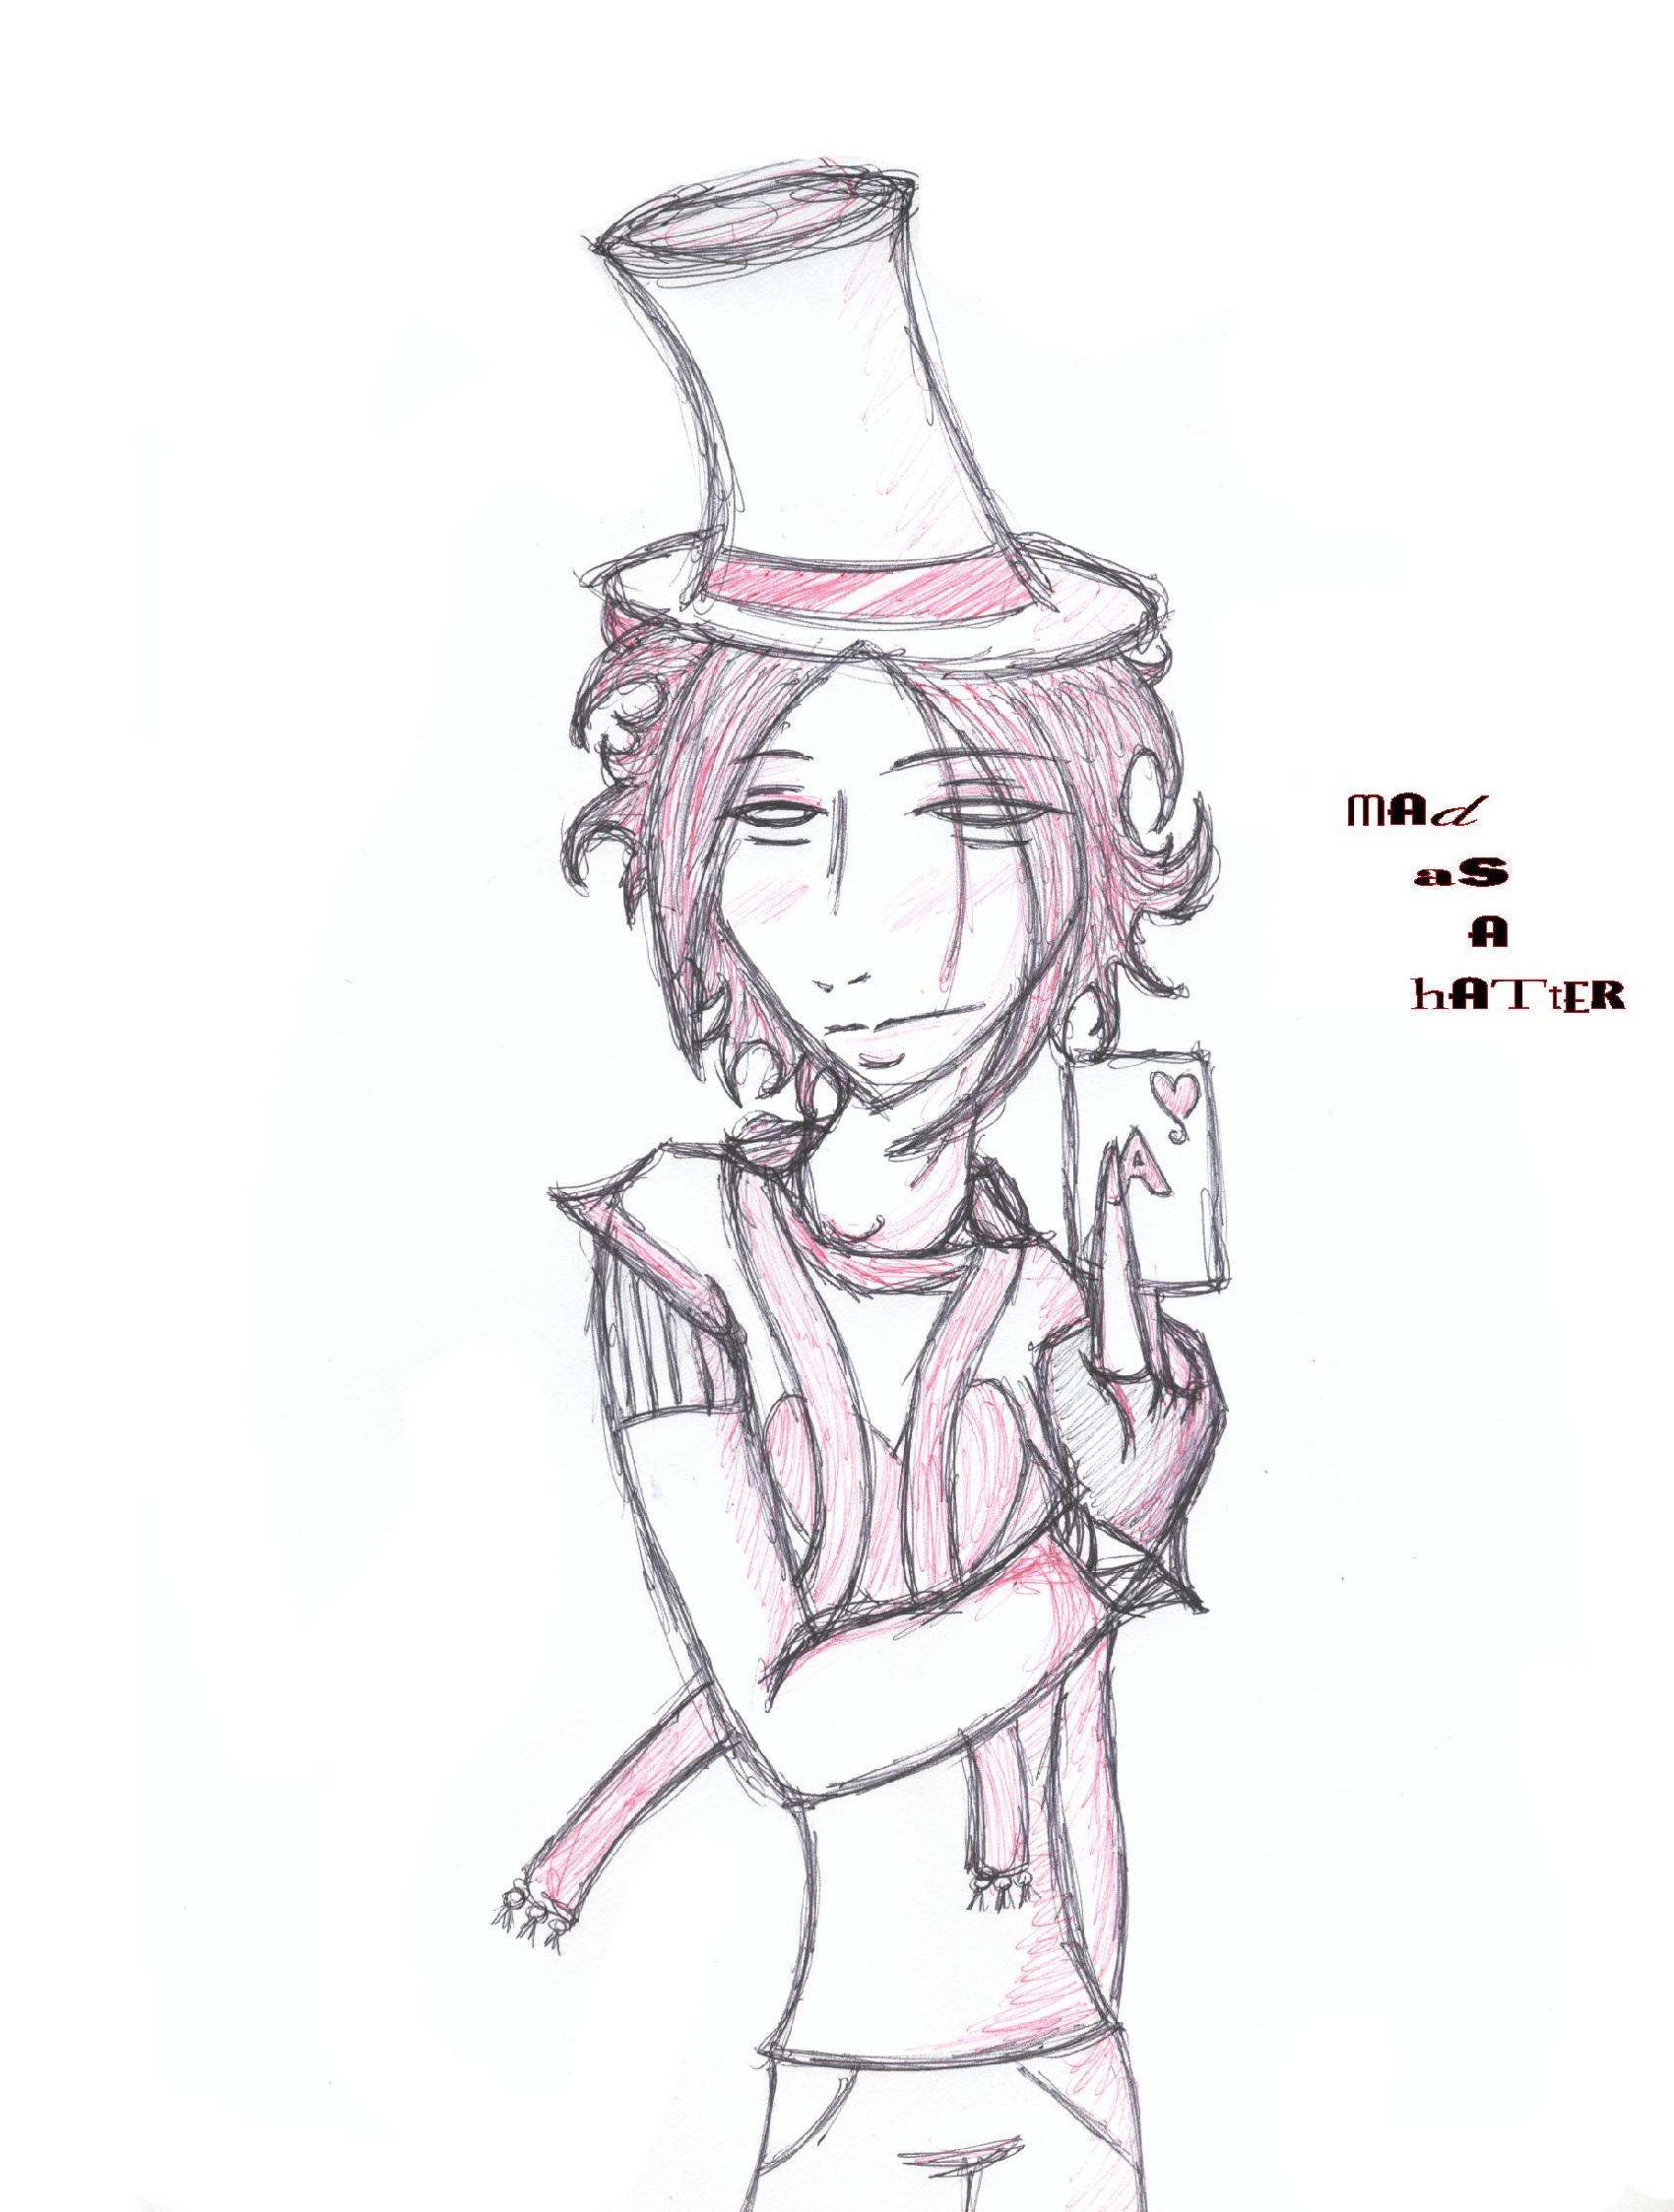 Mad as the Hatter by Chisai_Kitsune